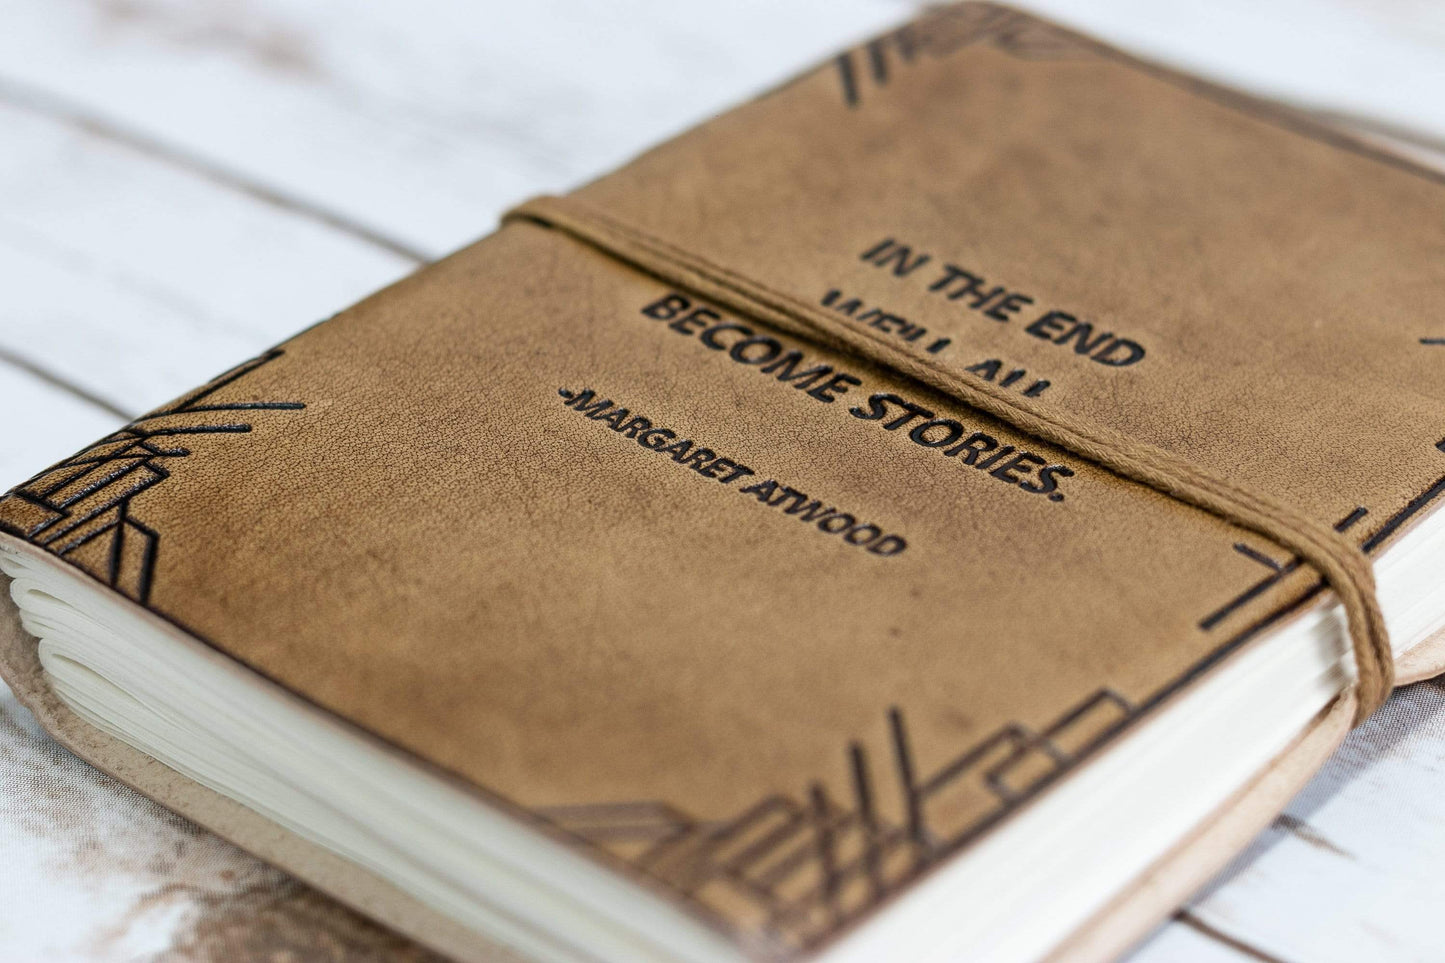 "We All Become Stories" Handmade Leather Journal - Leather Journals By Soothi